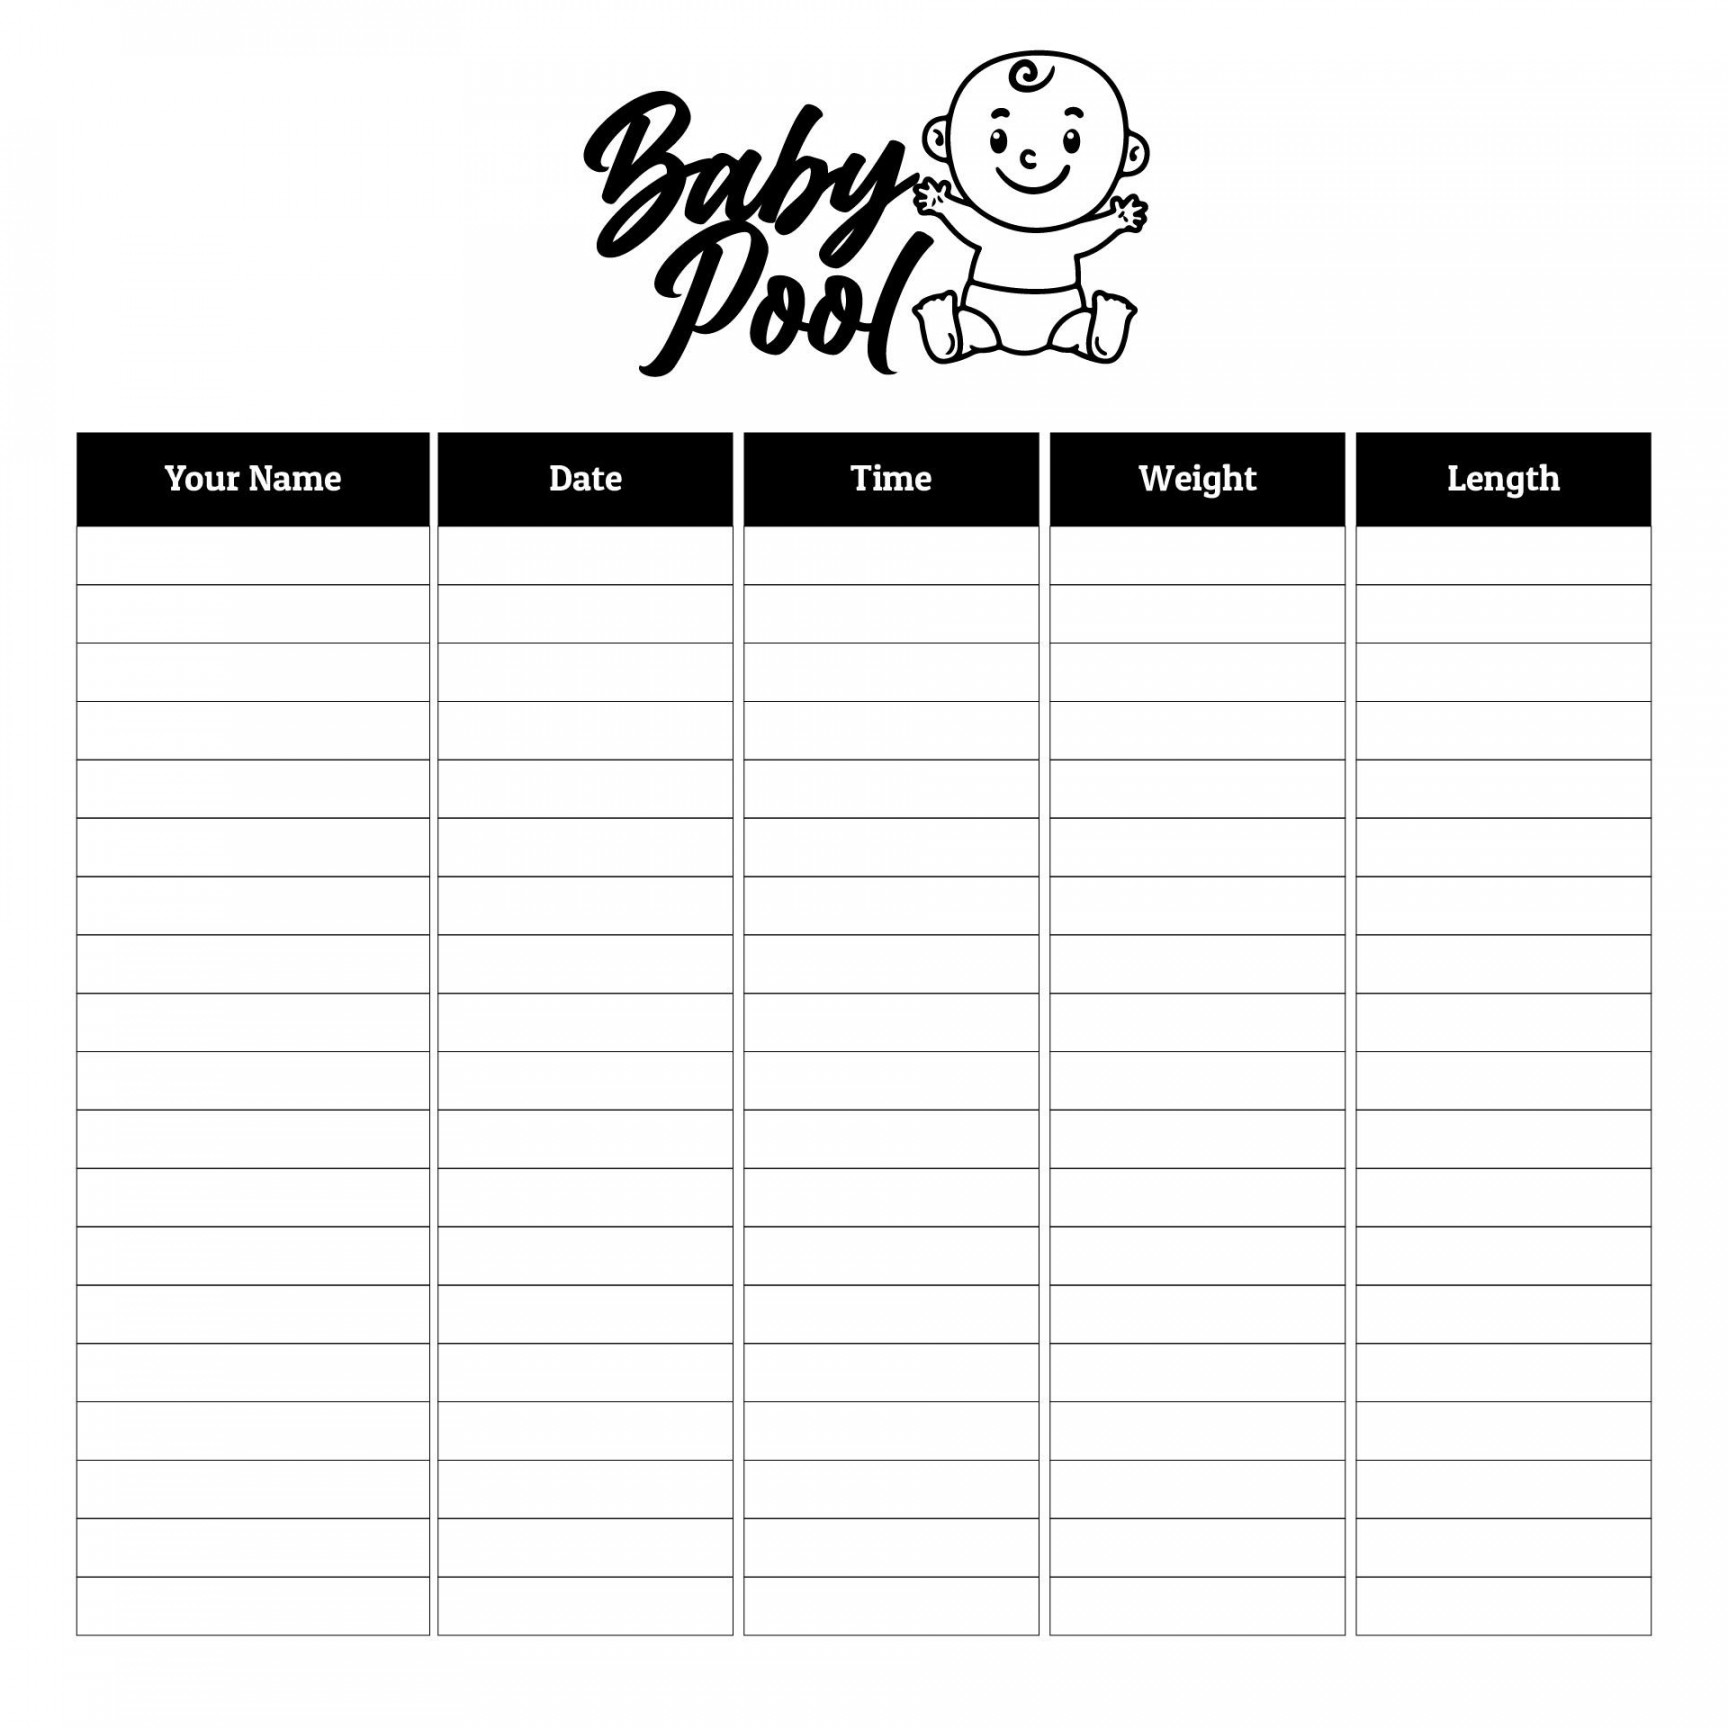 Printable Office Baby Pool Template Excel  Baby pool, Free baby